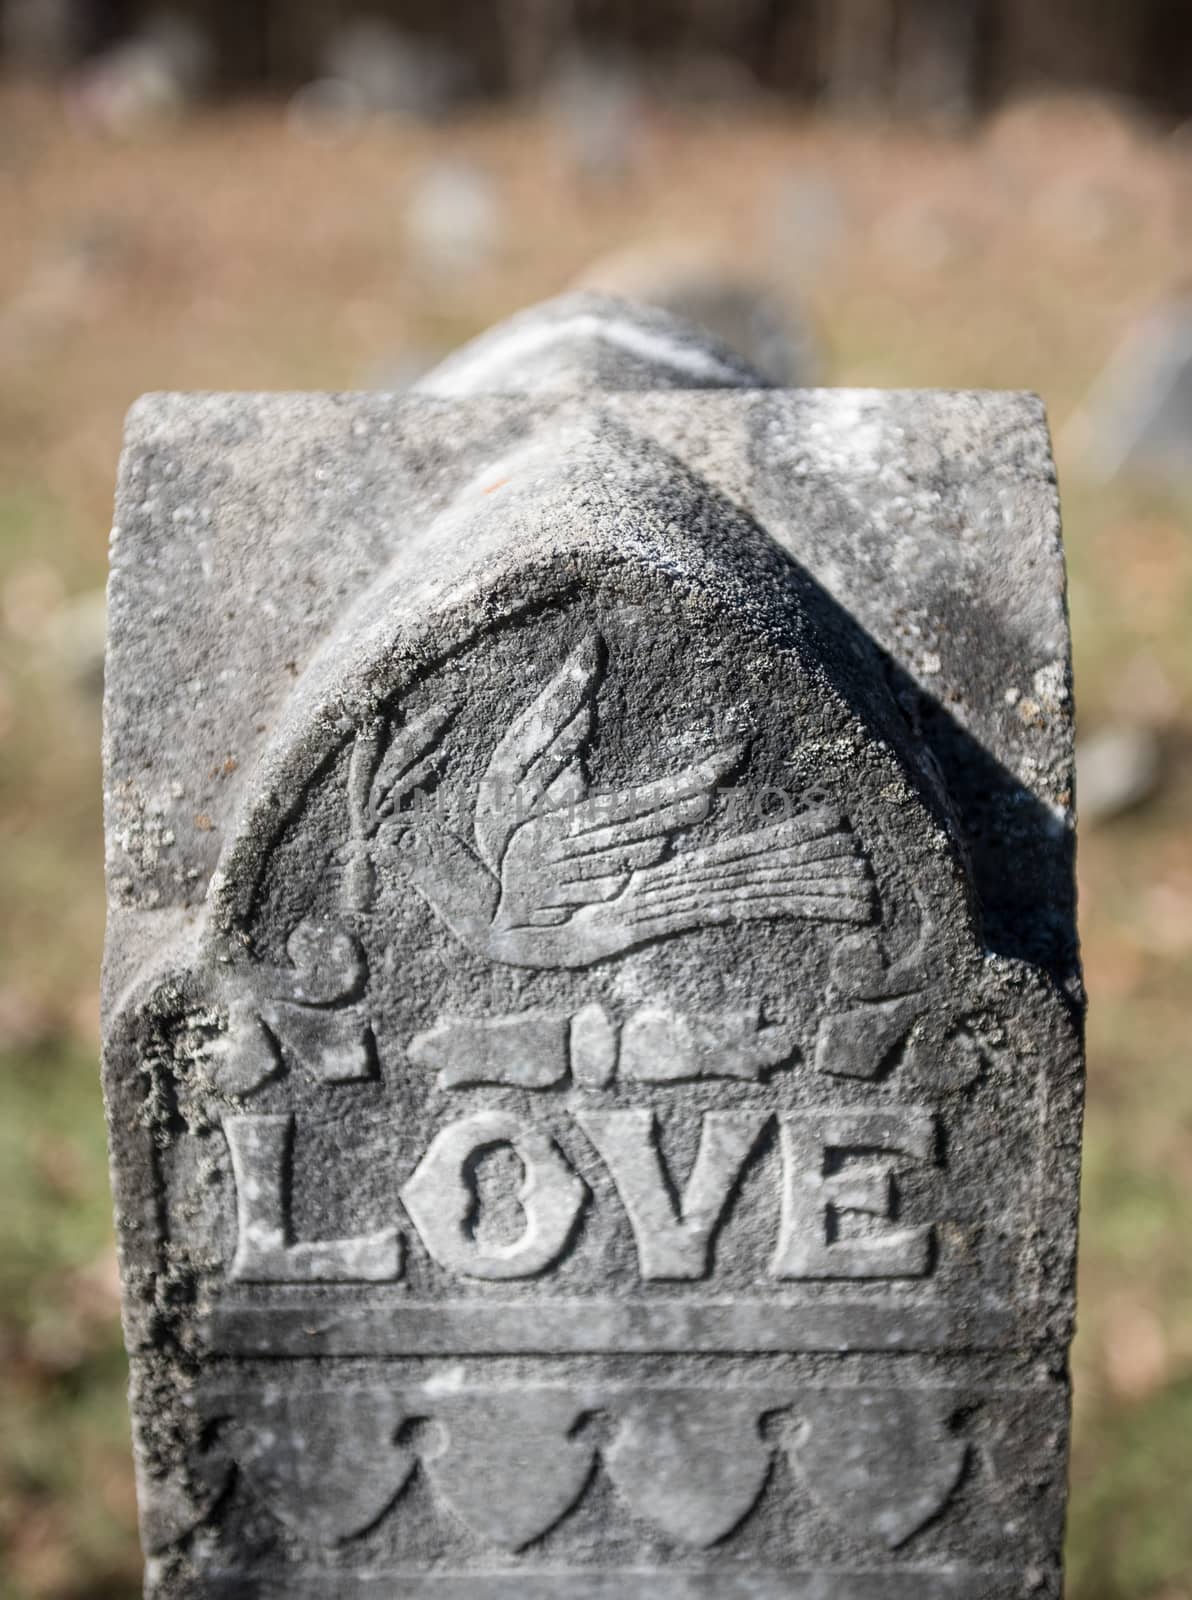 Old cemetery headstone with the word "Love" and peace dove